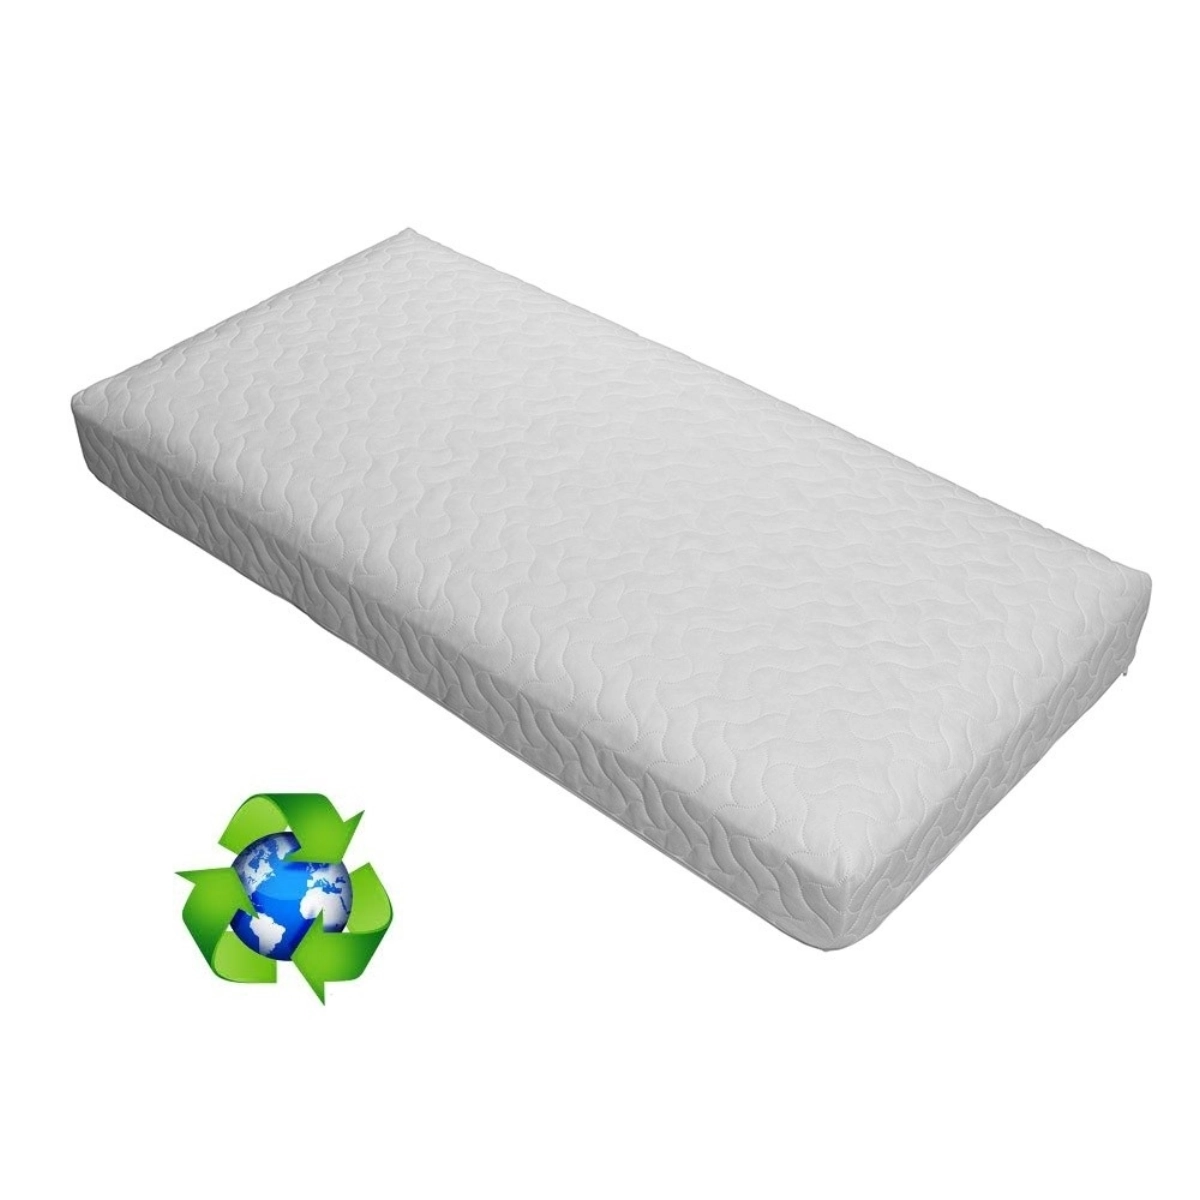 Image of Ventalux Non Allergenic Quilted Covered Solid Polyester Fibre Mattress-White (140x70)